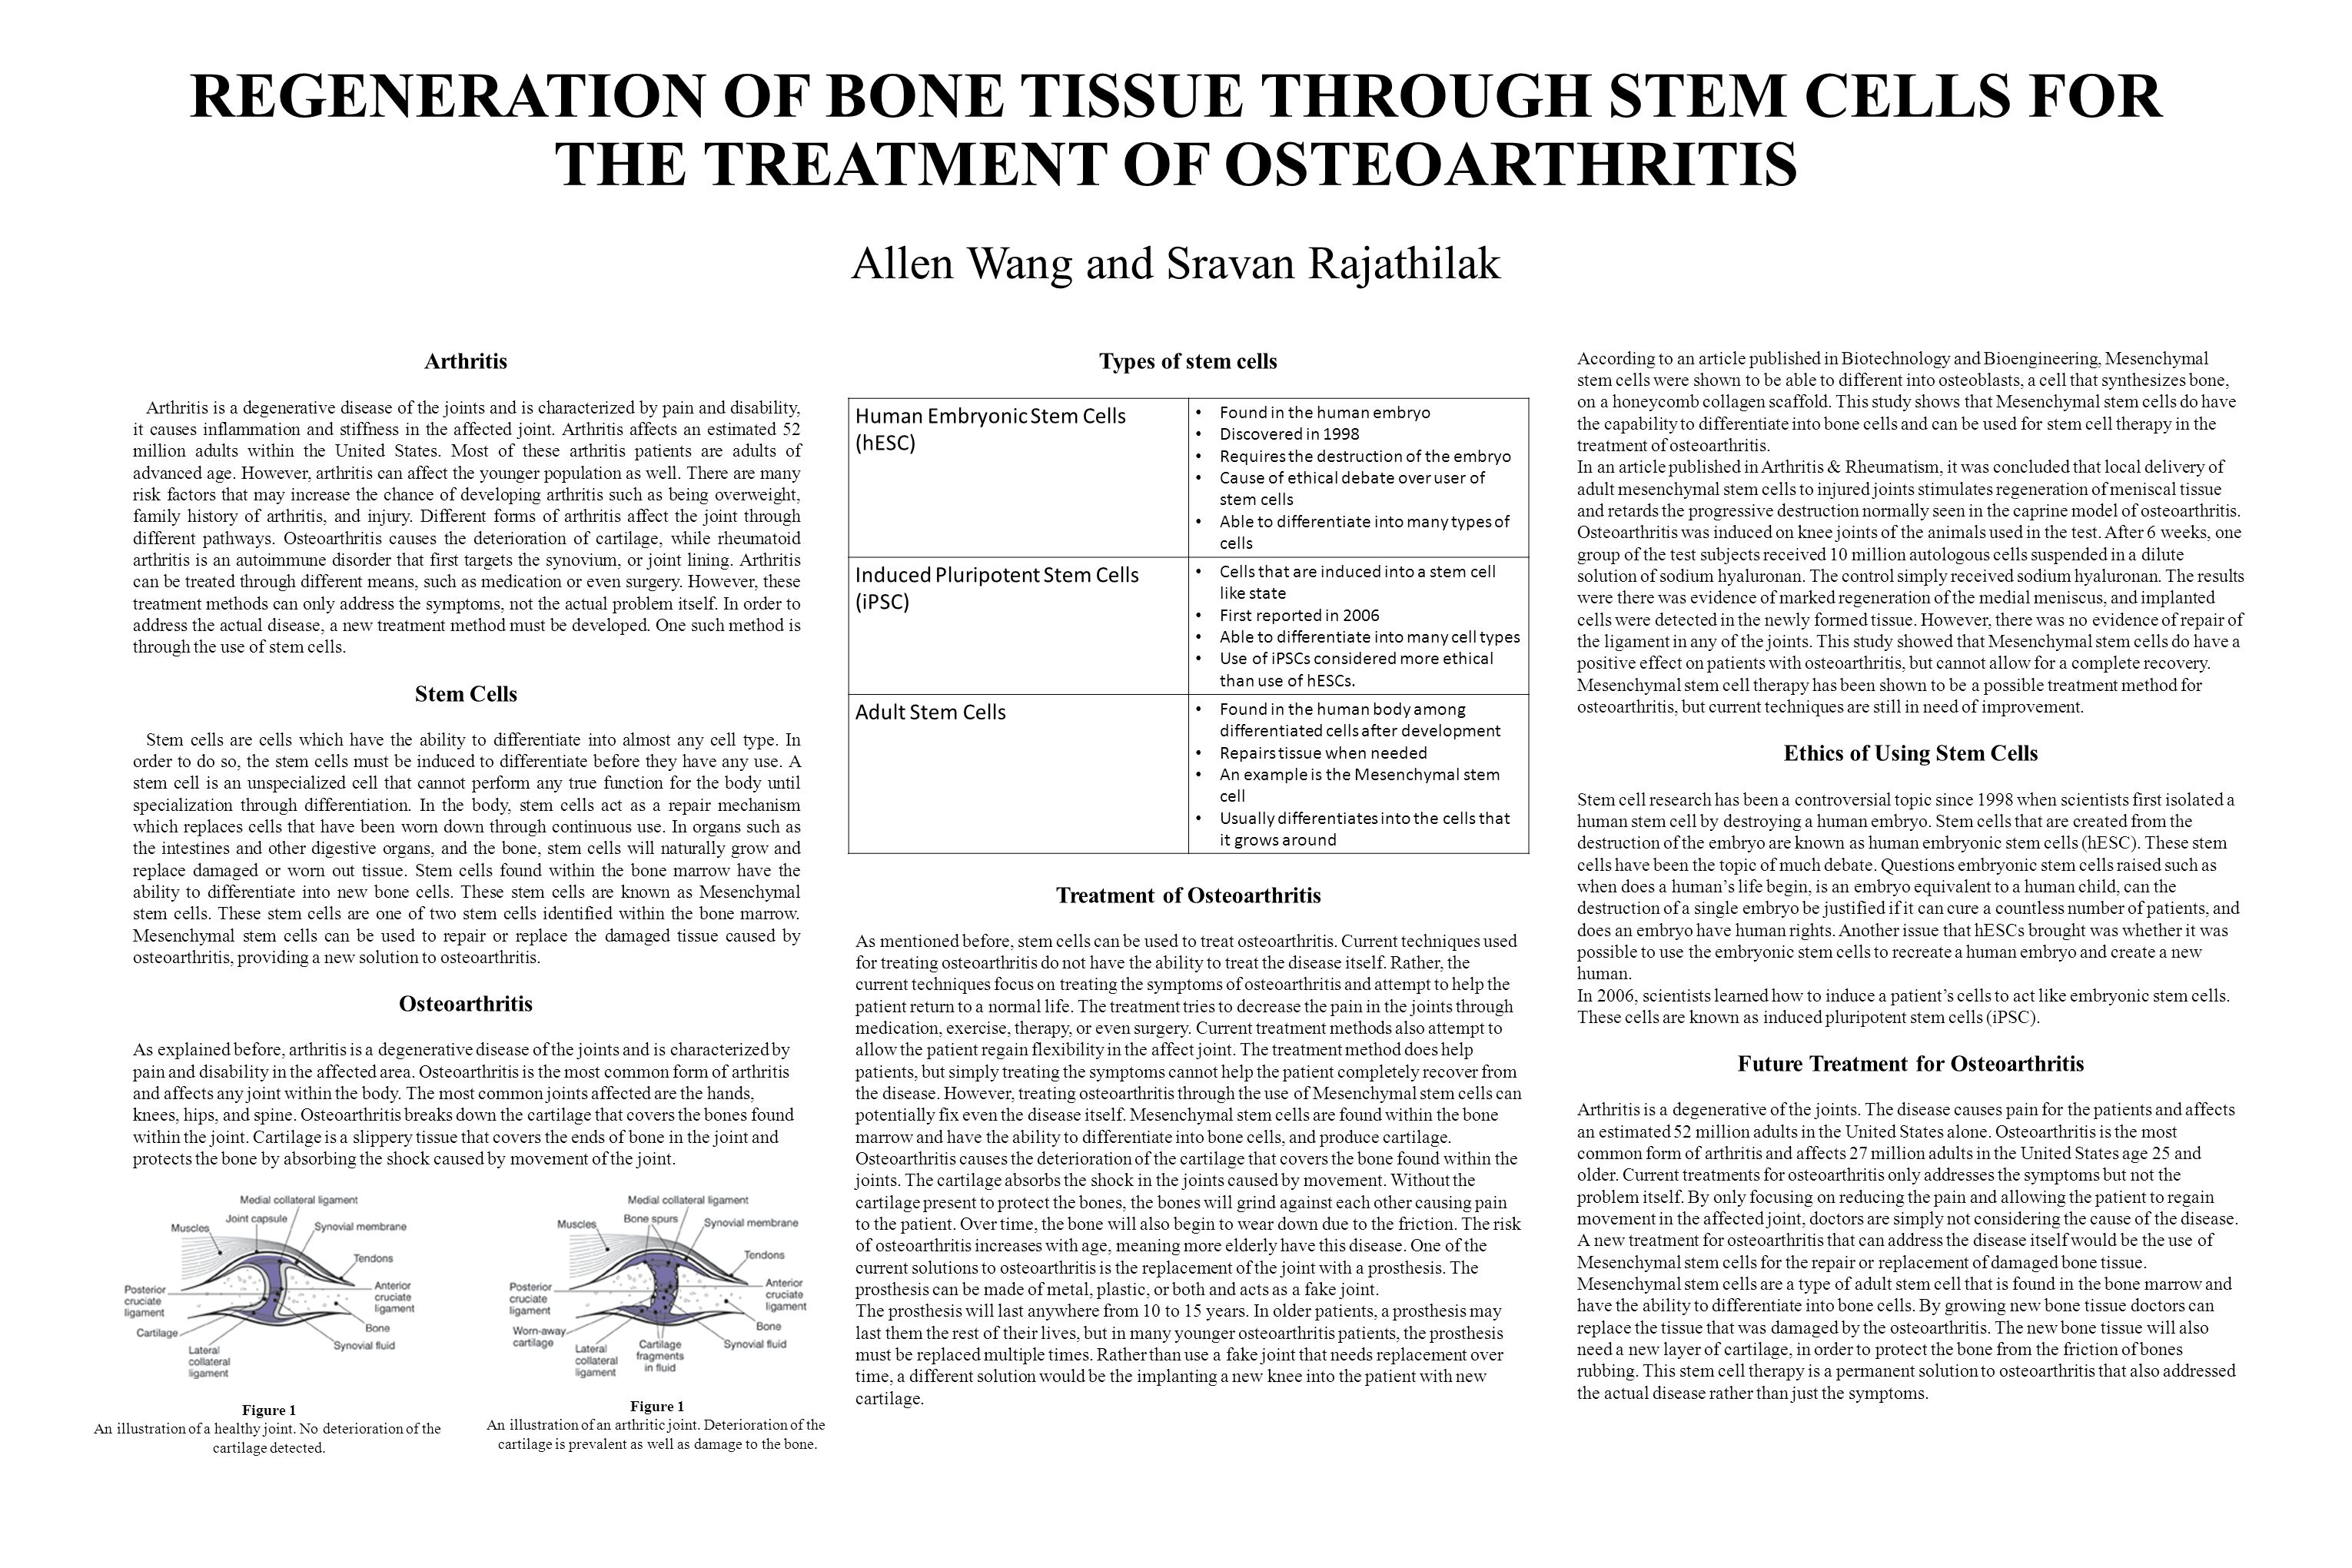 REGENERATION OF BONE TISSUE THROUGH STEM CELLS FOR THE TREATMENT OF OSTEOARTHRITIS Allen Wang and Sravan Rajathilak Arthritis Arthritis is a degenerative disease of the joints and is characterized by pain and disability, it causes inflammation and stiffness in the affected joint.